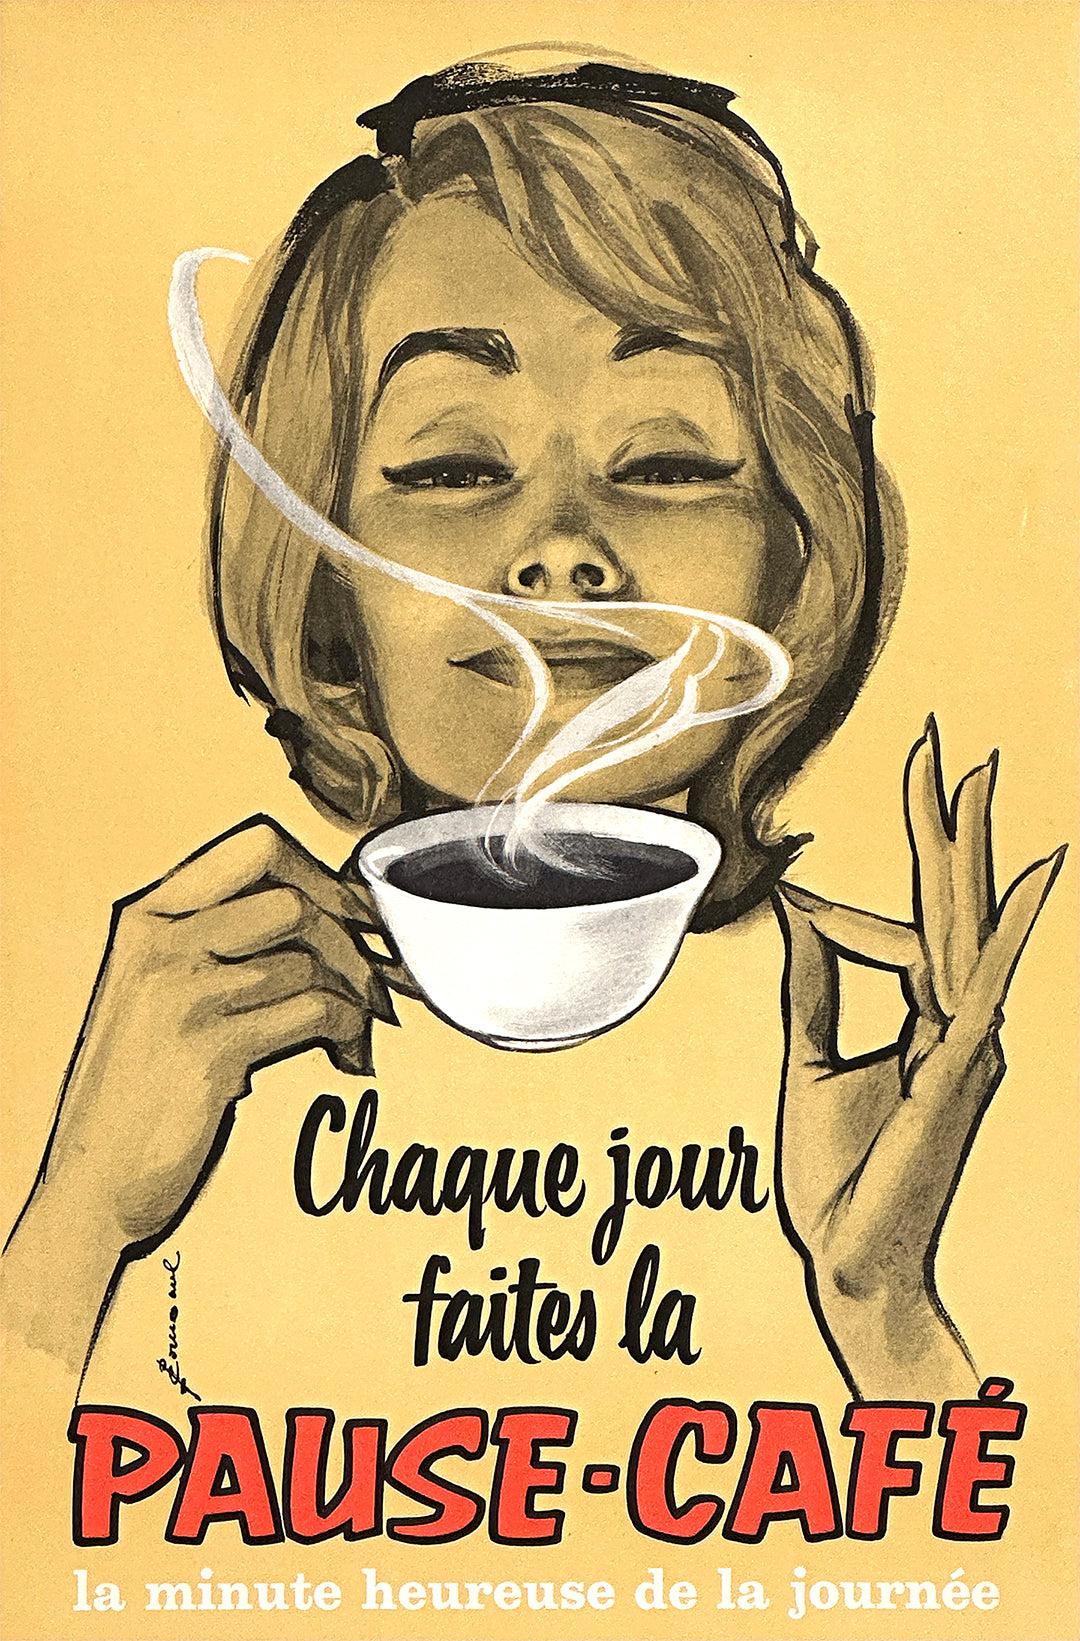 Original Vintage French Coffee Break Poster by Pierre Couronne c1950